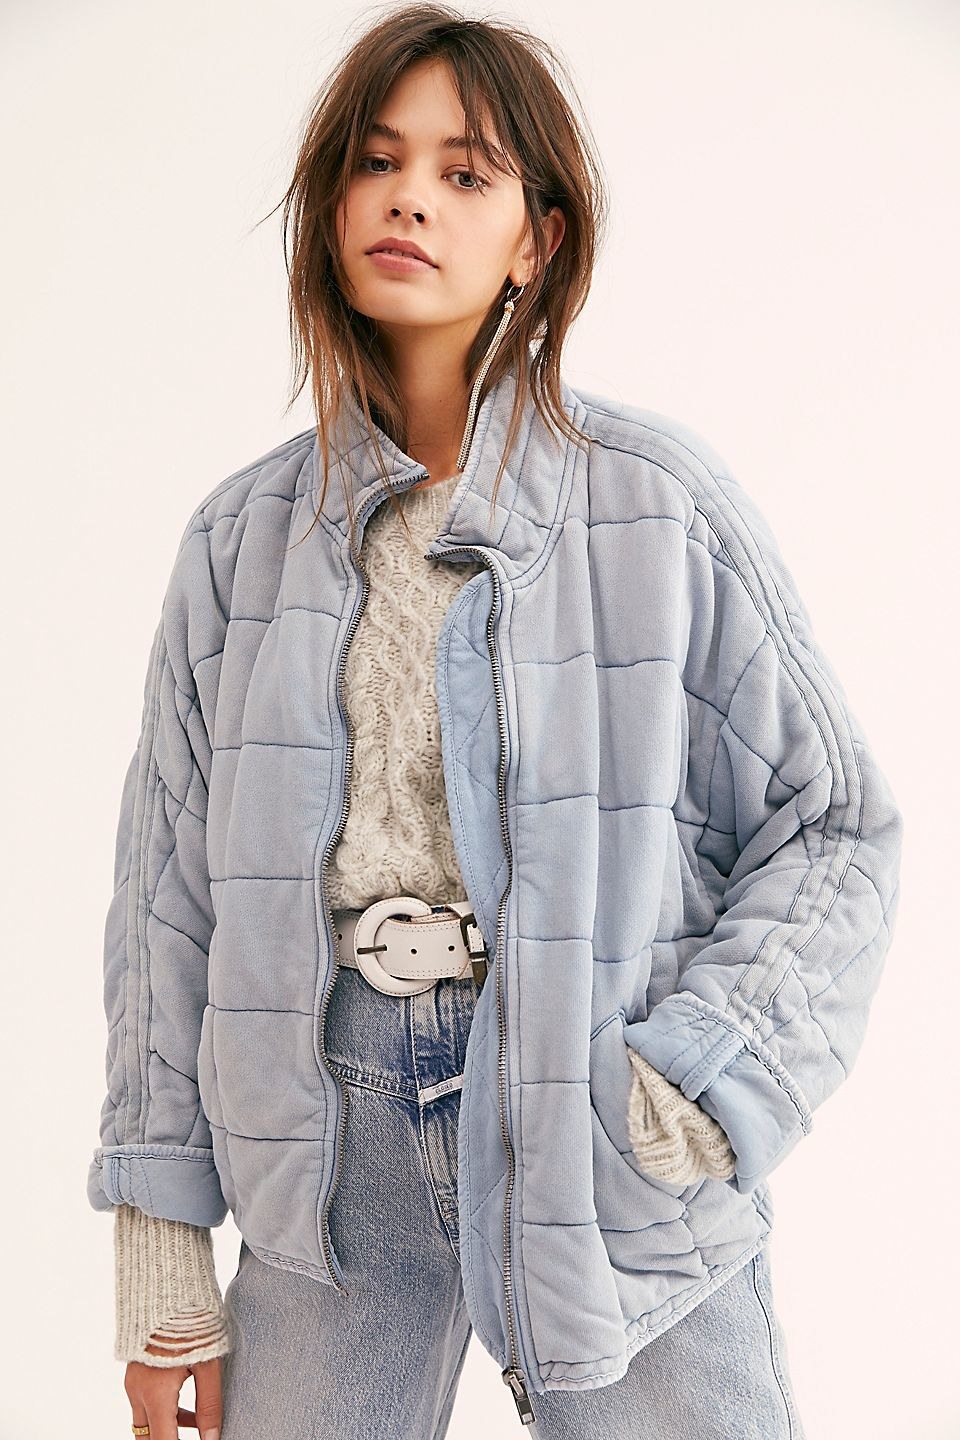 model wearing the quilted jacket in light blue